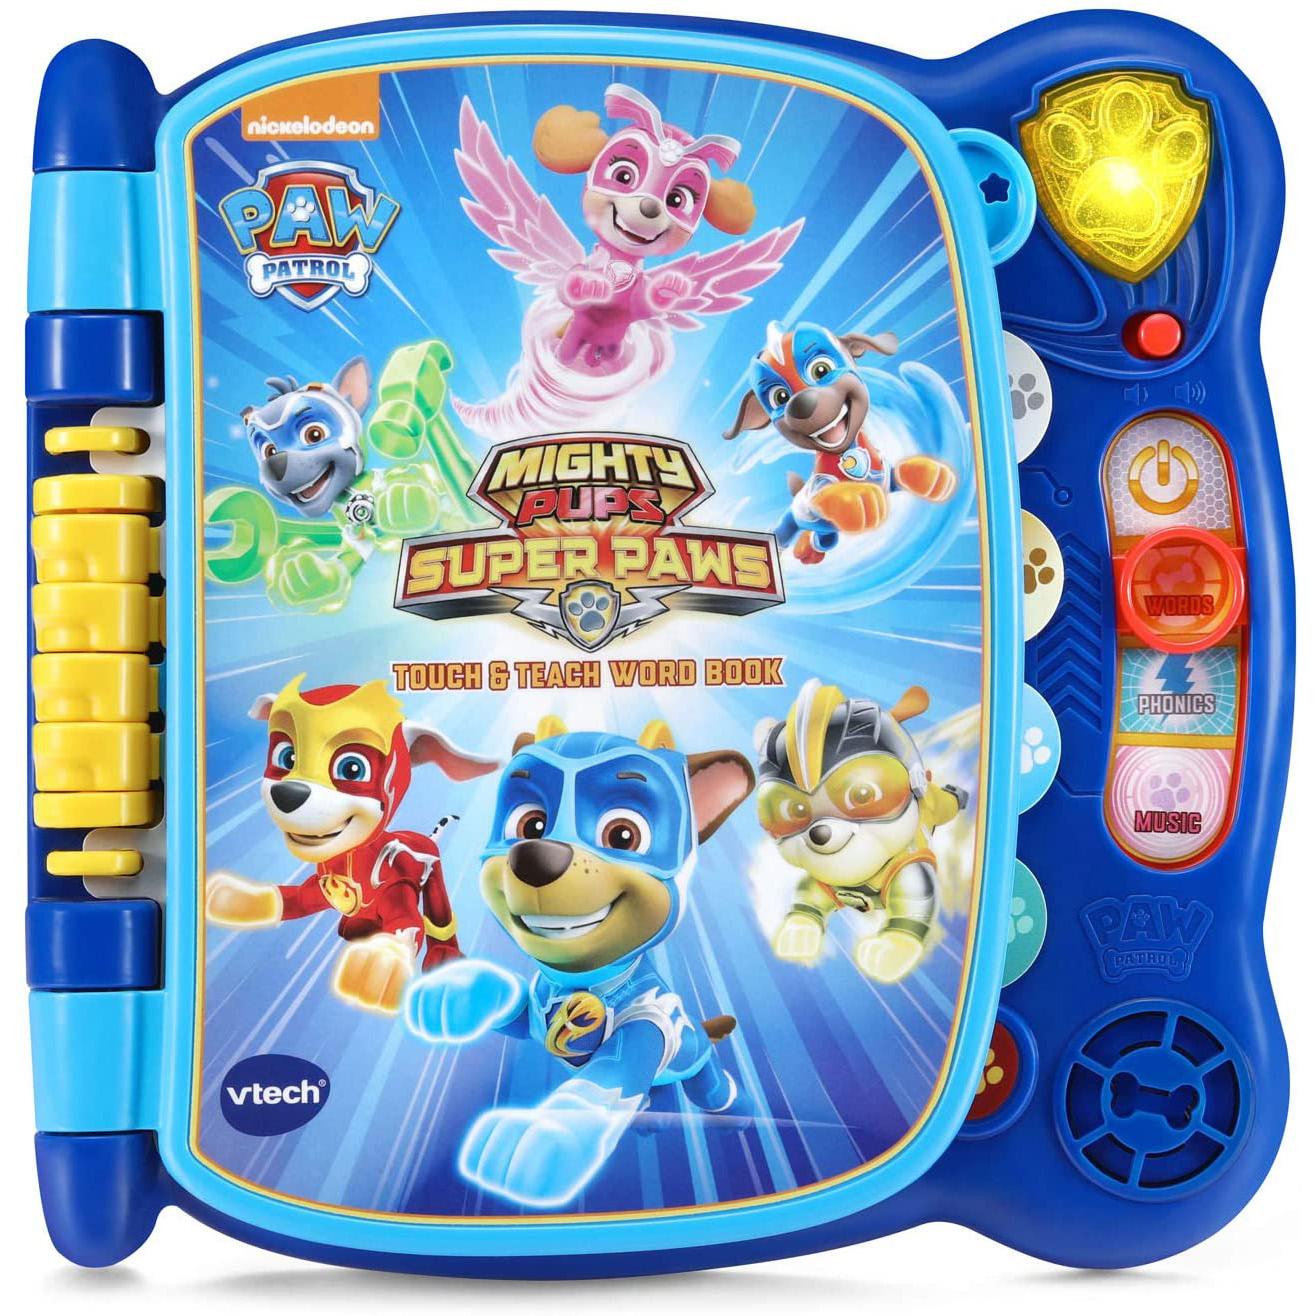 VTech PAW Patrol Mighty Pups Touch and Teach Word Book for $12.42